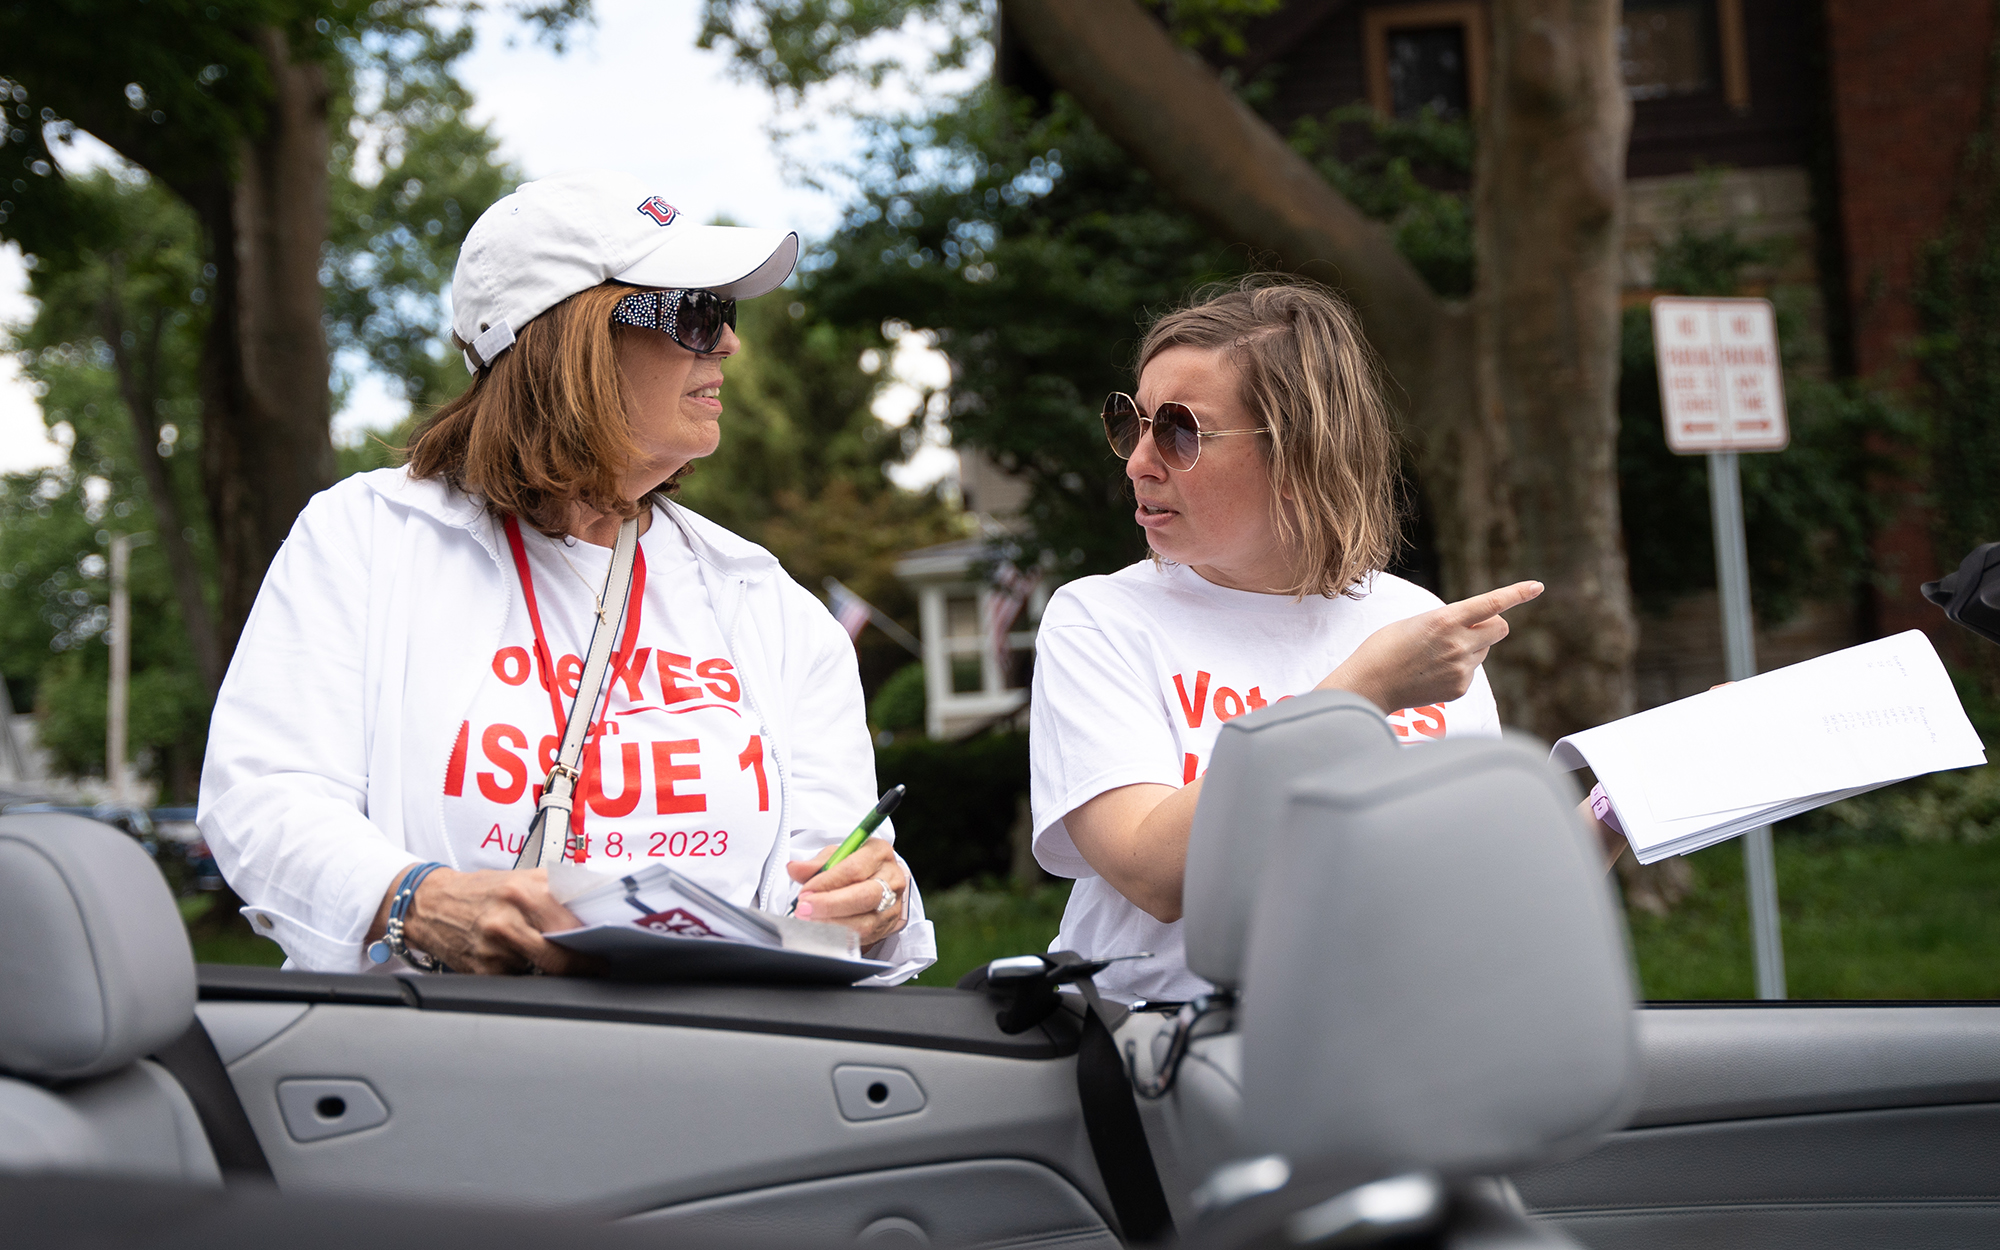 Kristine Wolfe, left, a Delaware County precinct committeewoman, and Janine Baker, president of the Delaware City Republican Club, plan their route as they go door to door on June 24, 2023, to urge people to vote “yes” on State Issue 1. (Photo by Mingson Lau/News21)